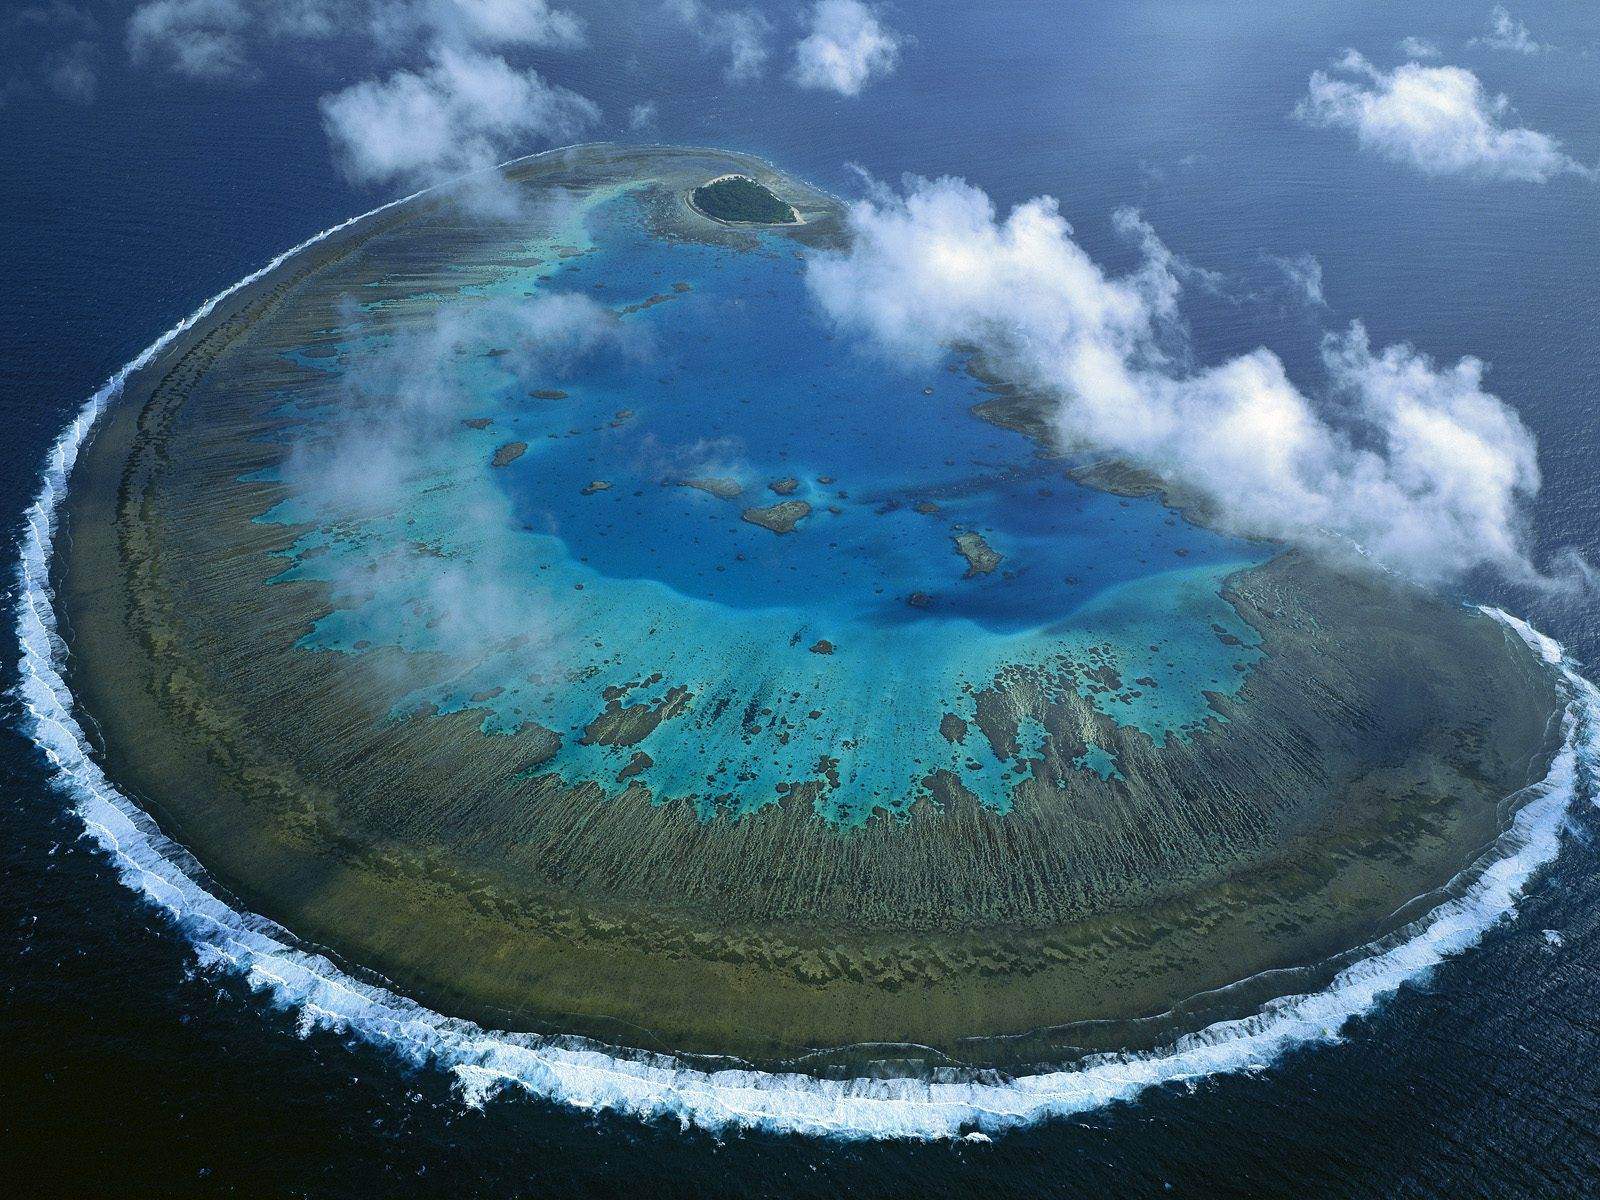 Lady Musgrave Island coral atoll, Great Barrier Reef Marine Park, Queensland, Australia